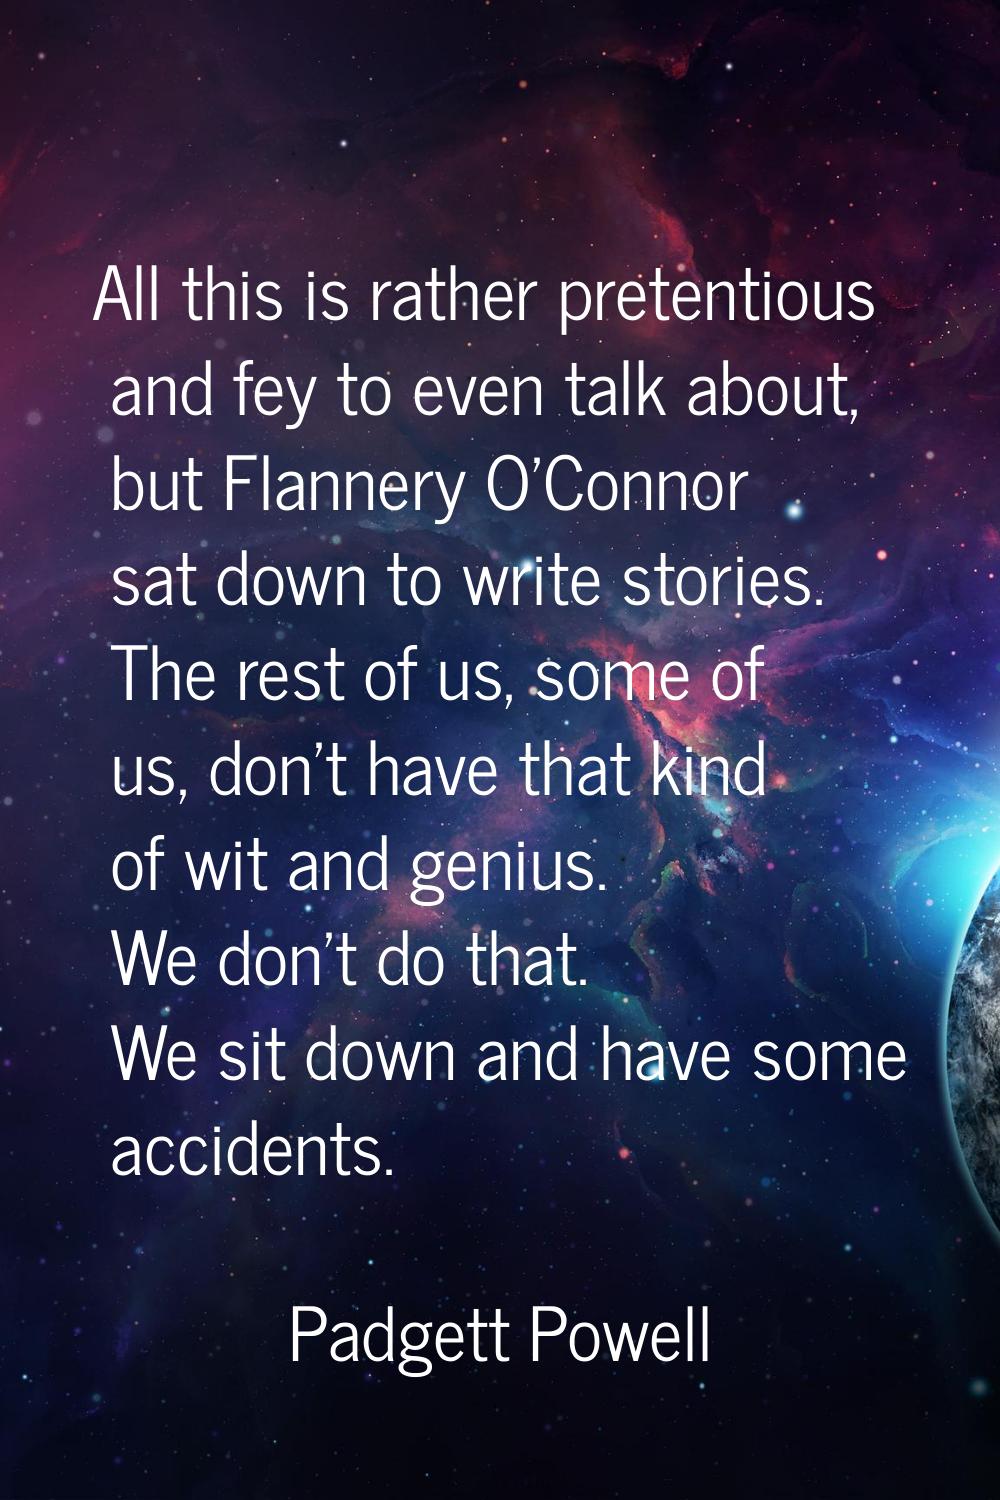 All this is rather pretentious and fey to even talk about, but Flannery O'Connor sat down to write 